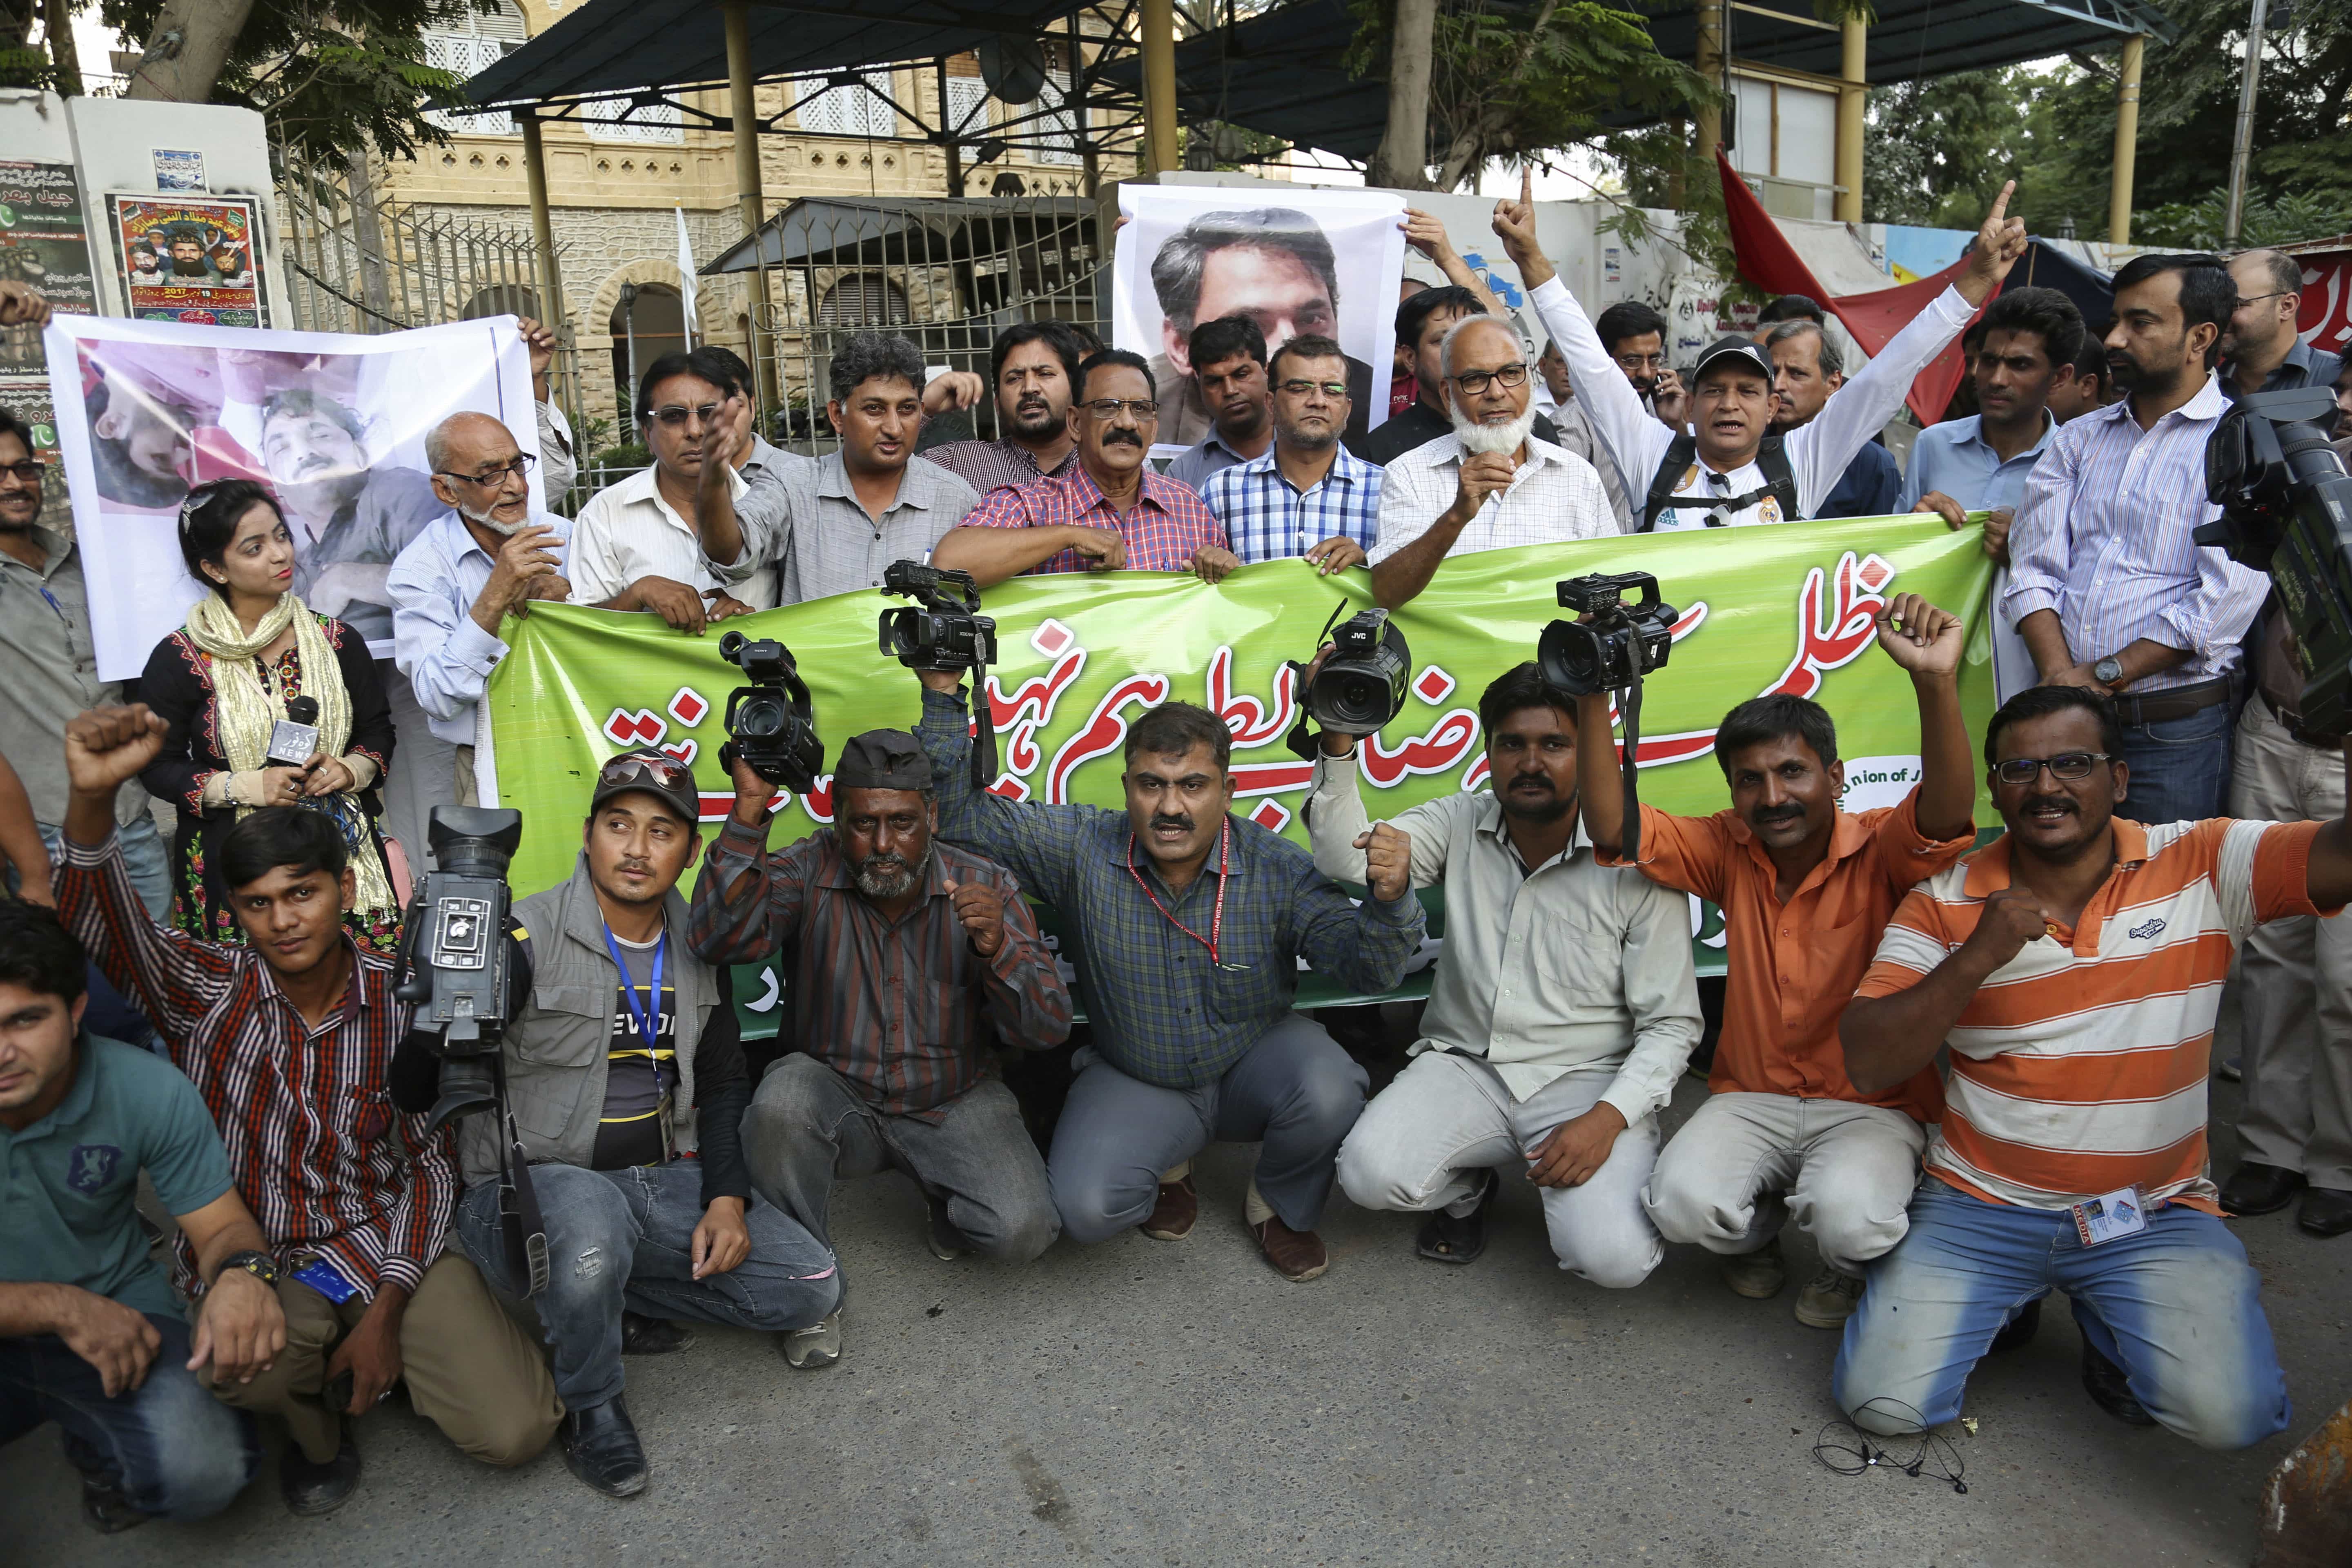 Journalists protest an attack on their colleague Ahmed Noorani, pictured in the photos, in Karachi, Pakistan, 30 October 2017, AP Photo/Shakil Adil